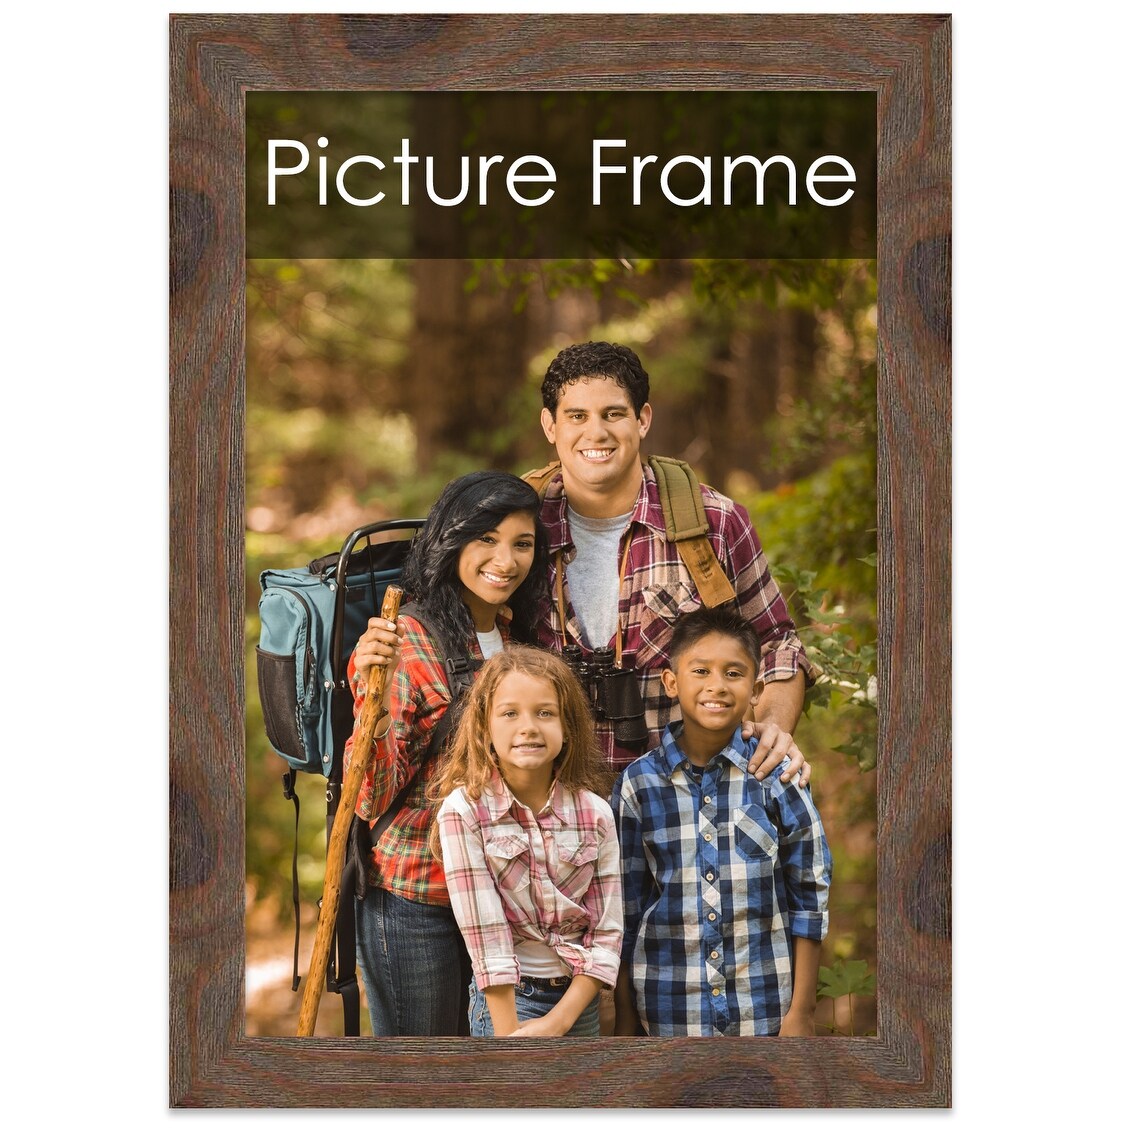 Poster Palooza 6x10 Frame White Solid Pine Wood Picture Frame | UV Acrylic,  Foam Board Backing & Hanging Hardware